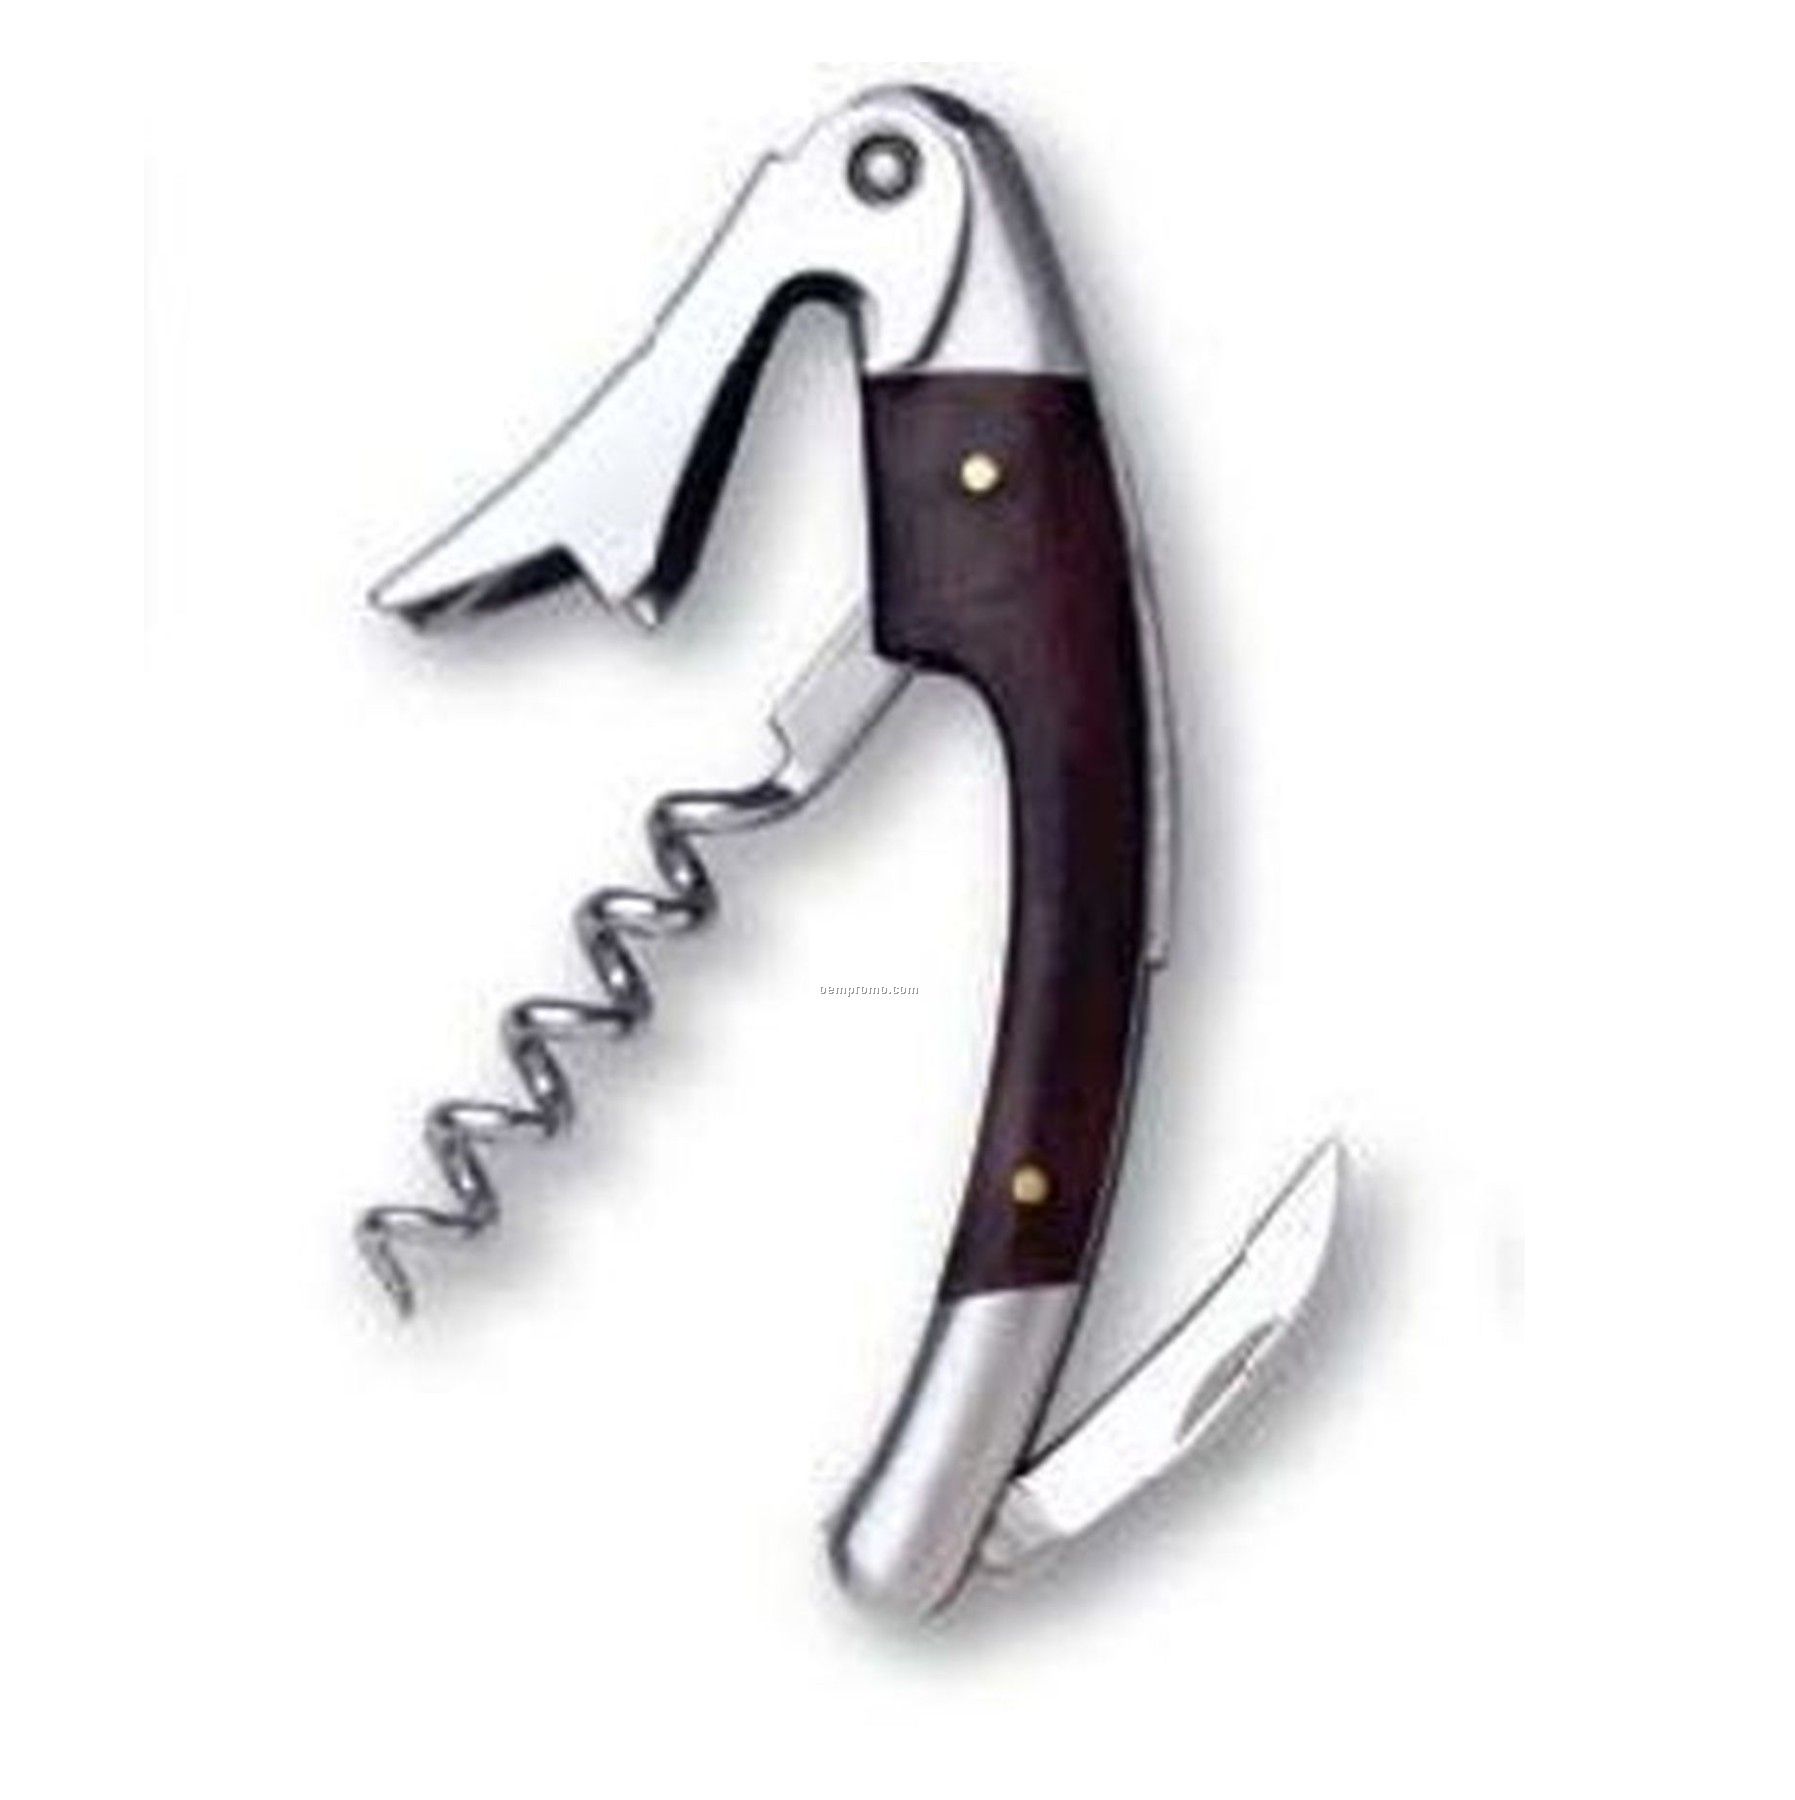 Curved Stainless Steel Corkscrew With Dark Wood Inset